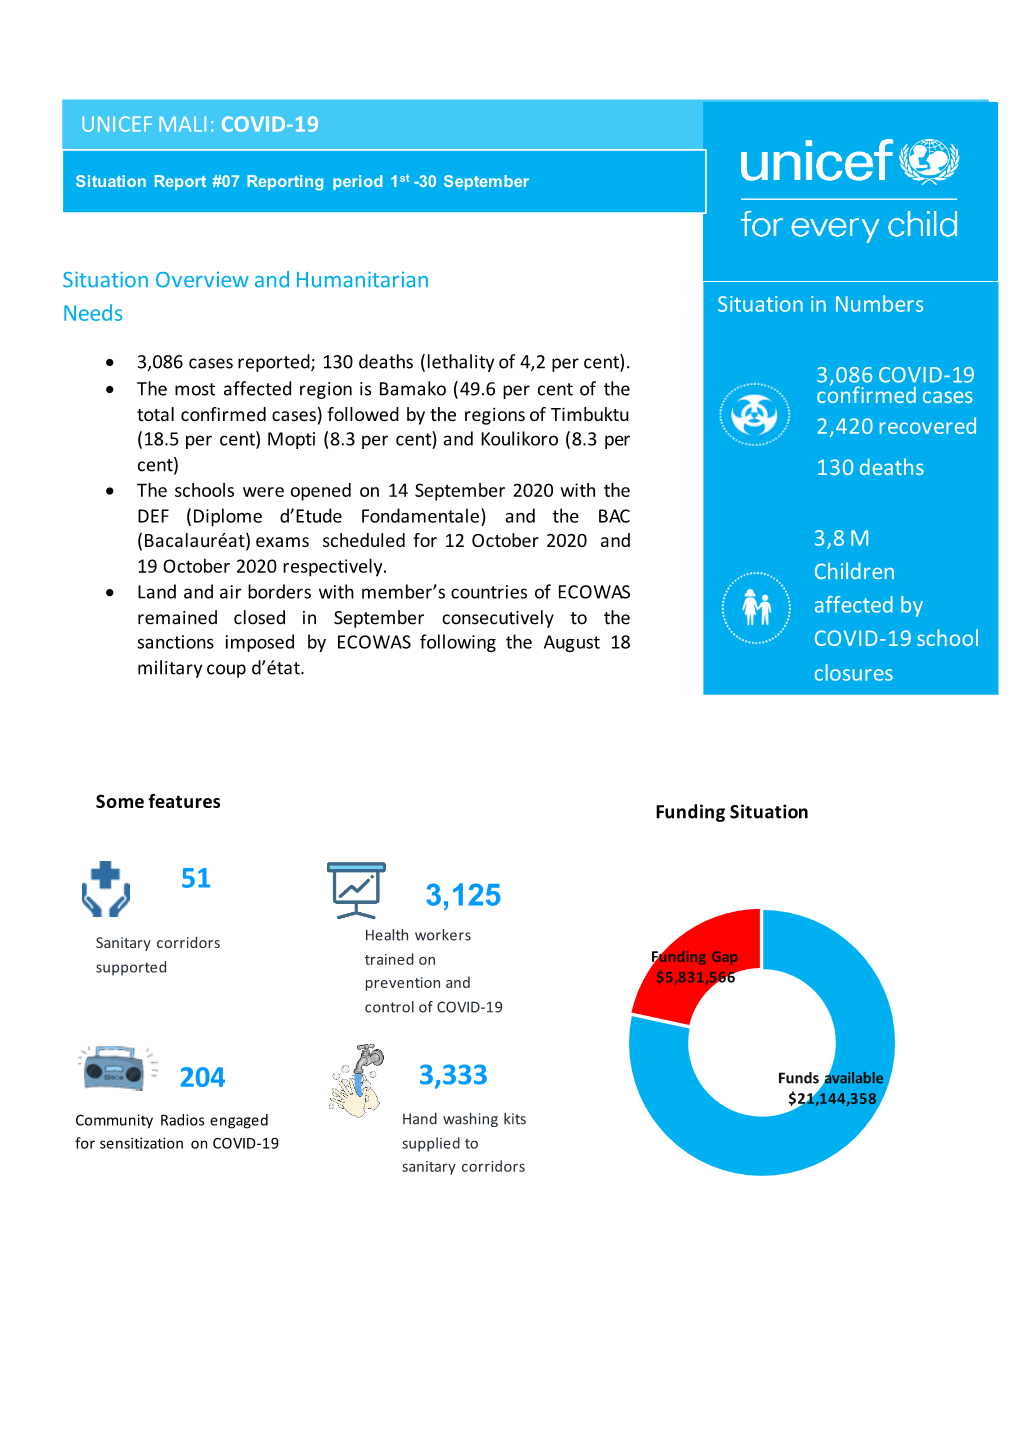 Situation Overview and Humanitarian Needs UNICEF MALI: COVID-19